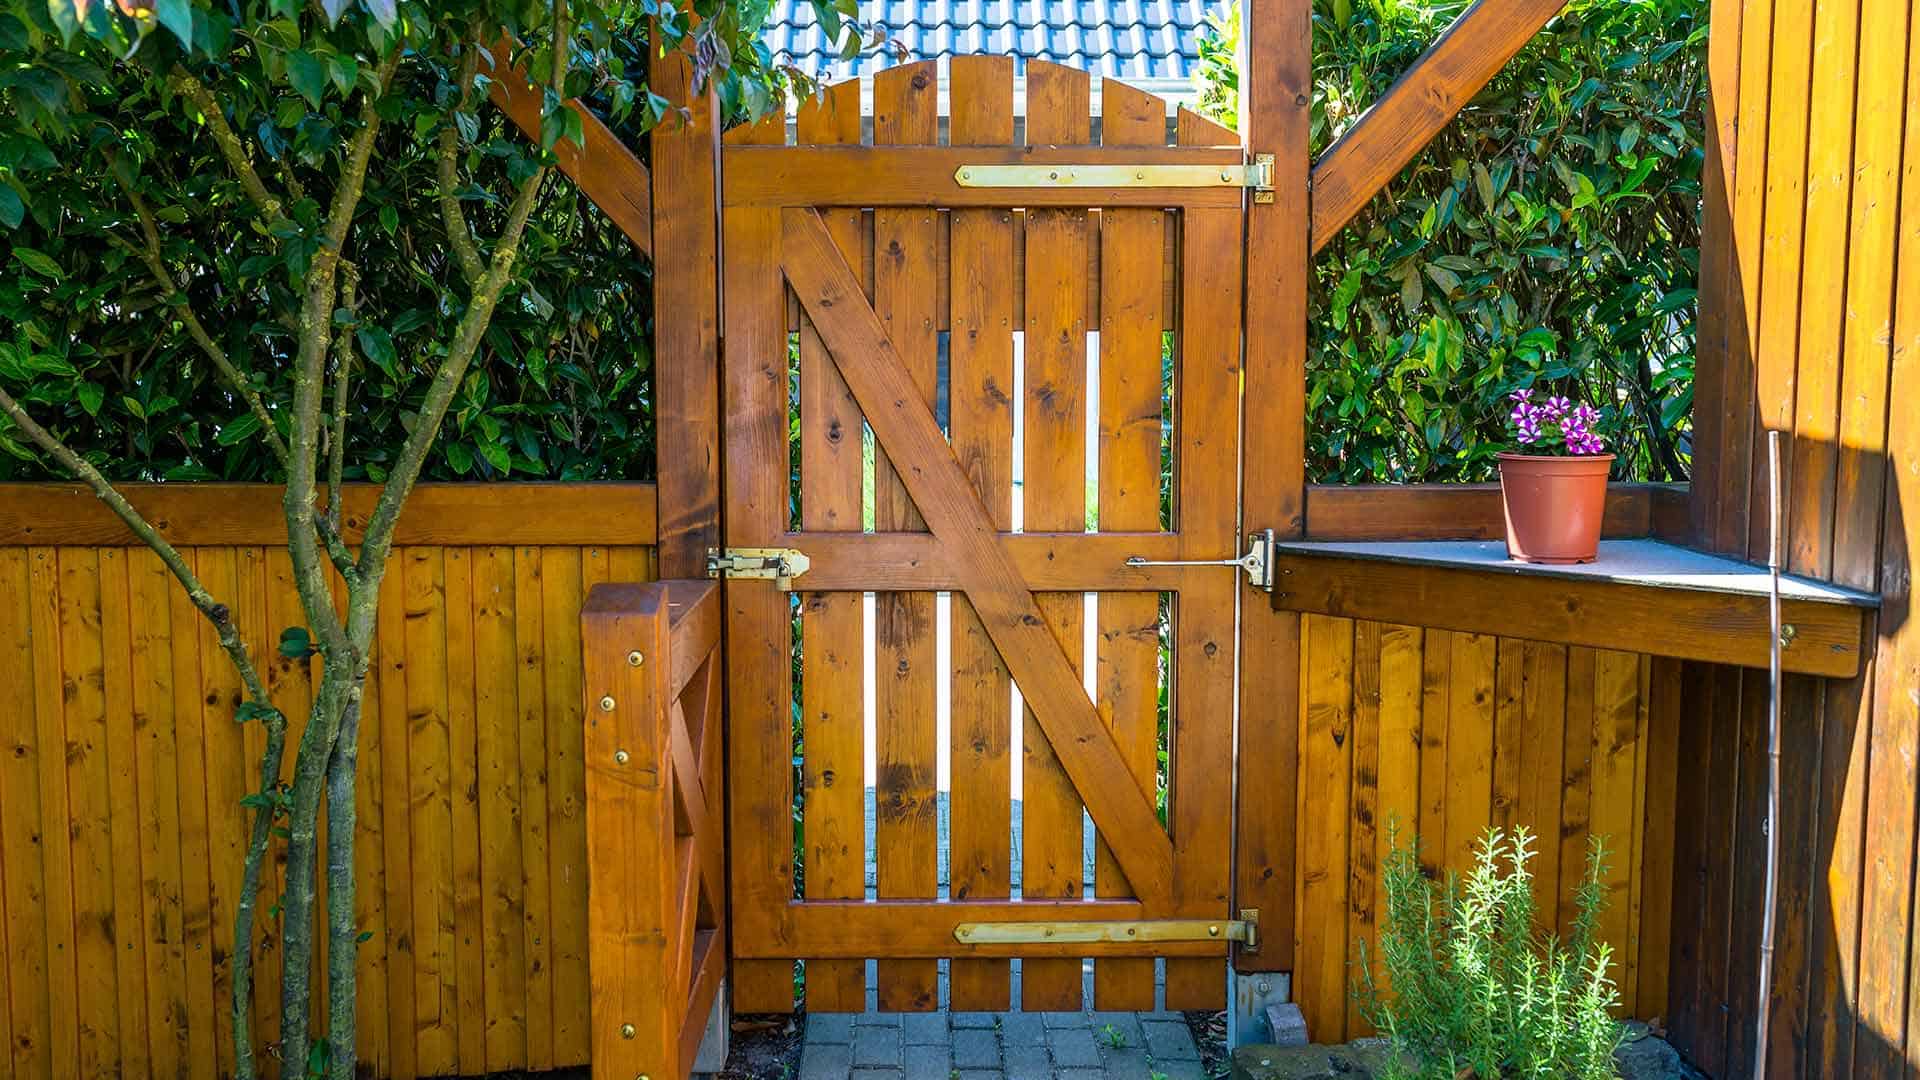 Fencing and Wooden Gate